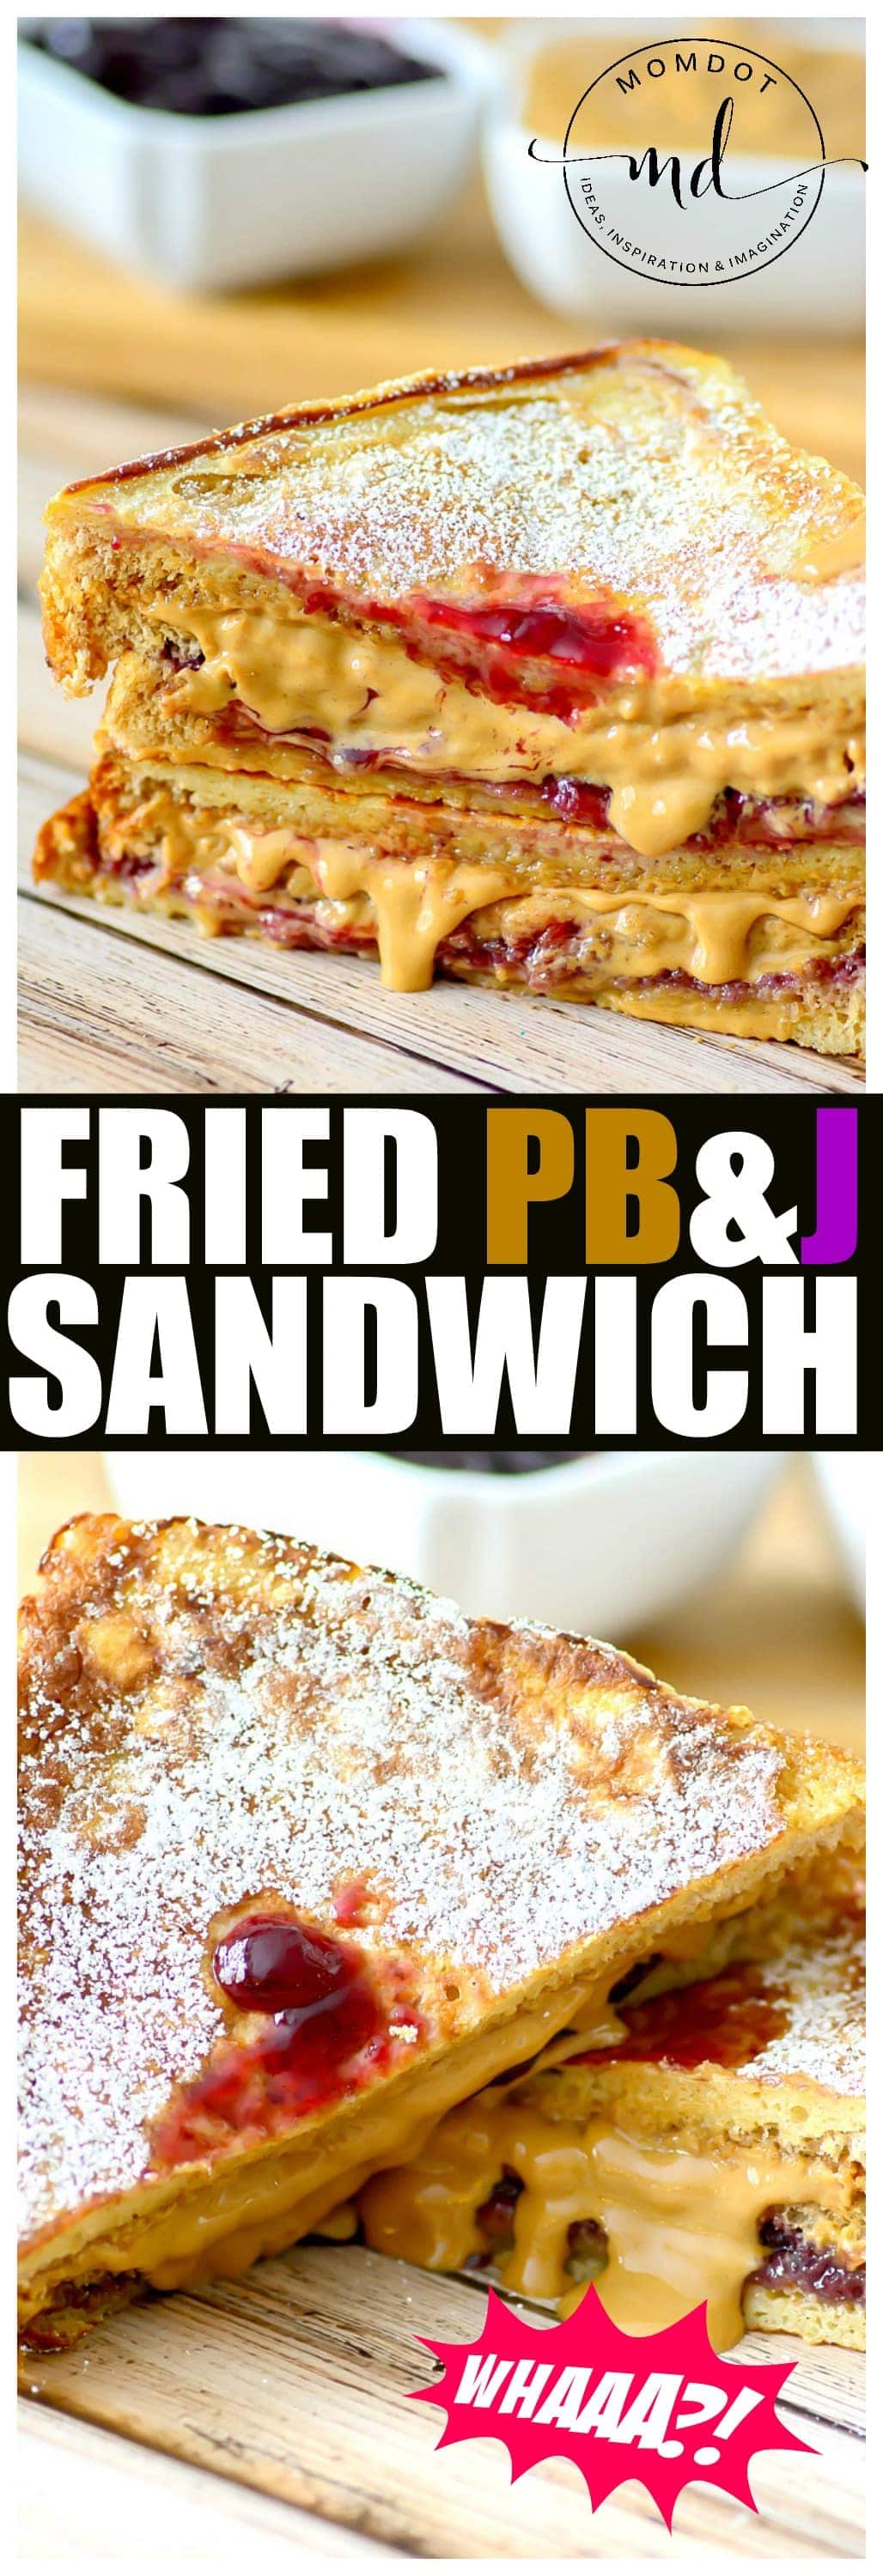 Fried PB&J recipe, a deep fried Peanut Butter and Jelly Sandwich that is a unique spin on this old classic and kid favorite sandwich